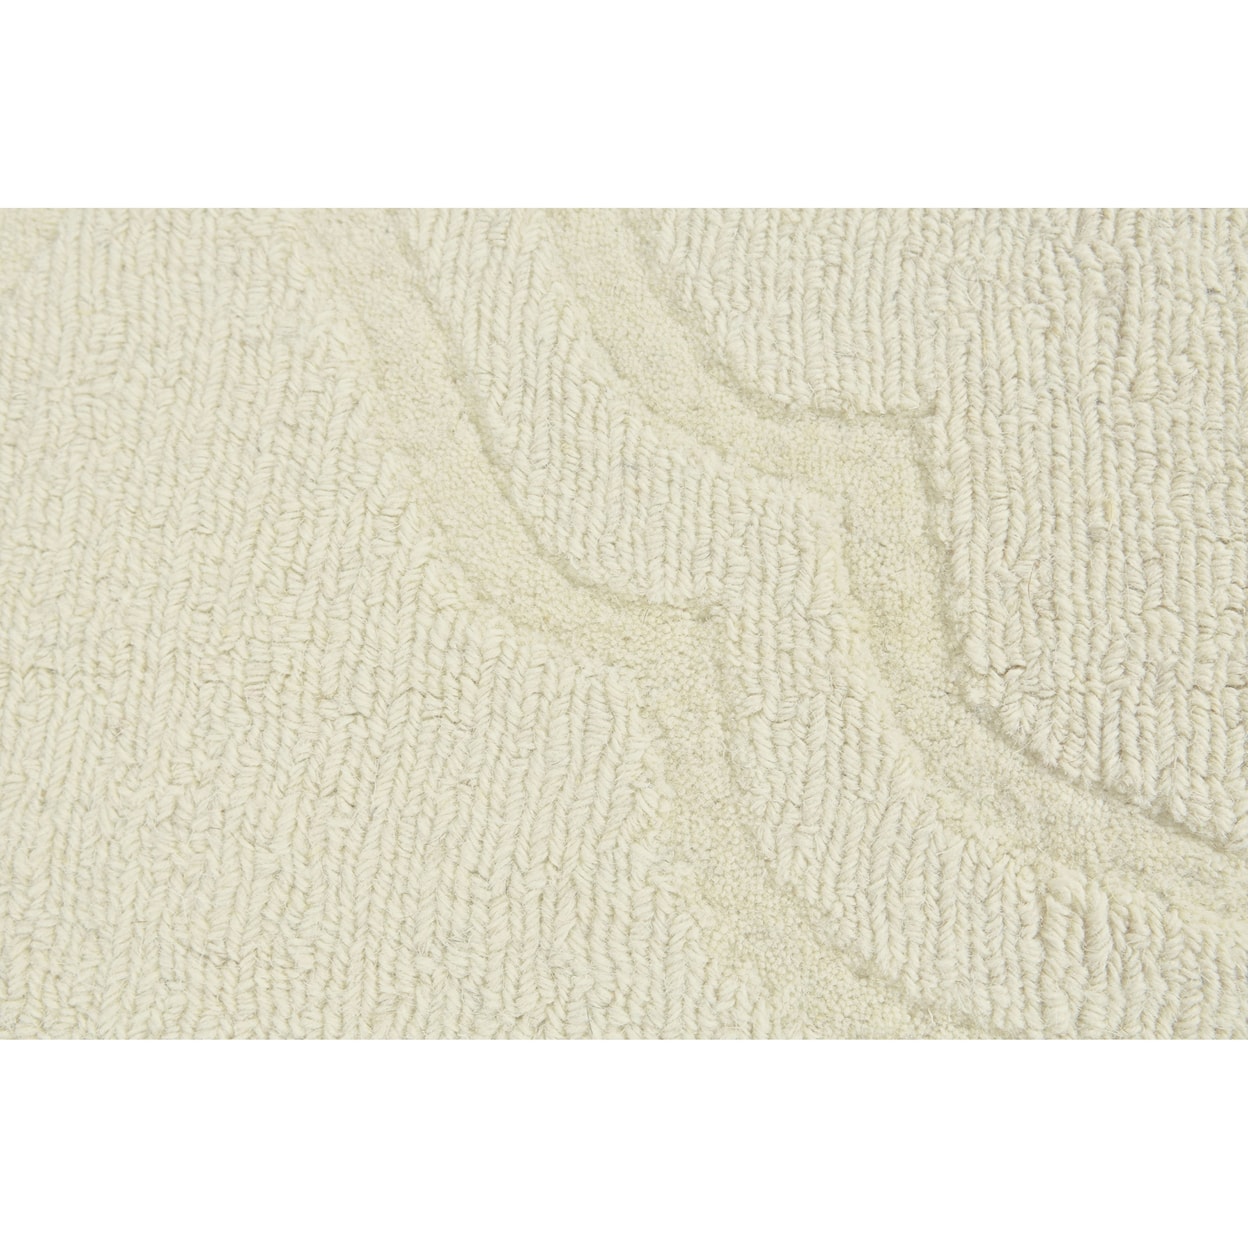 Feizy Rugs Soma Ivory 9'-6" x 13'-6" Area Rug